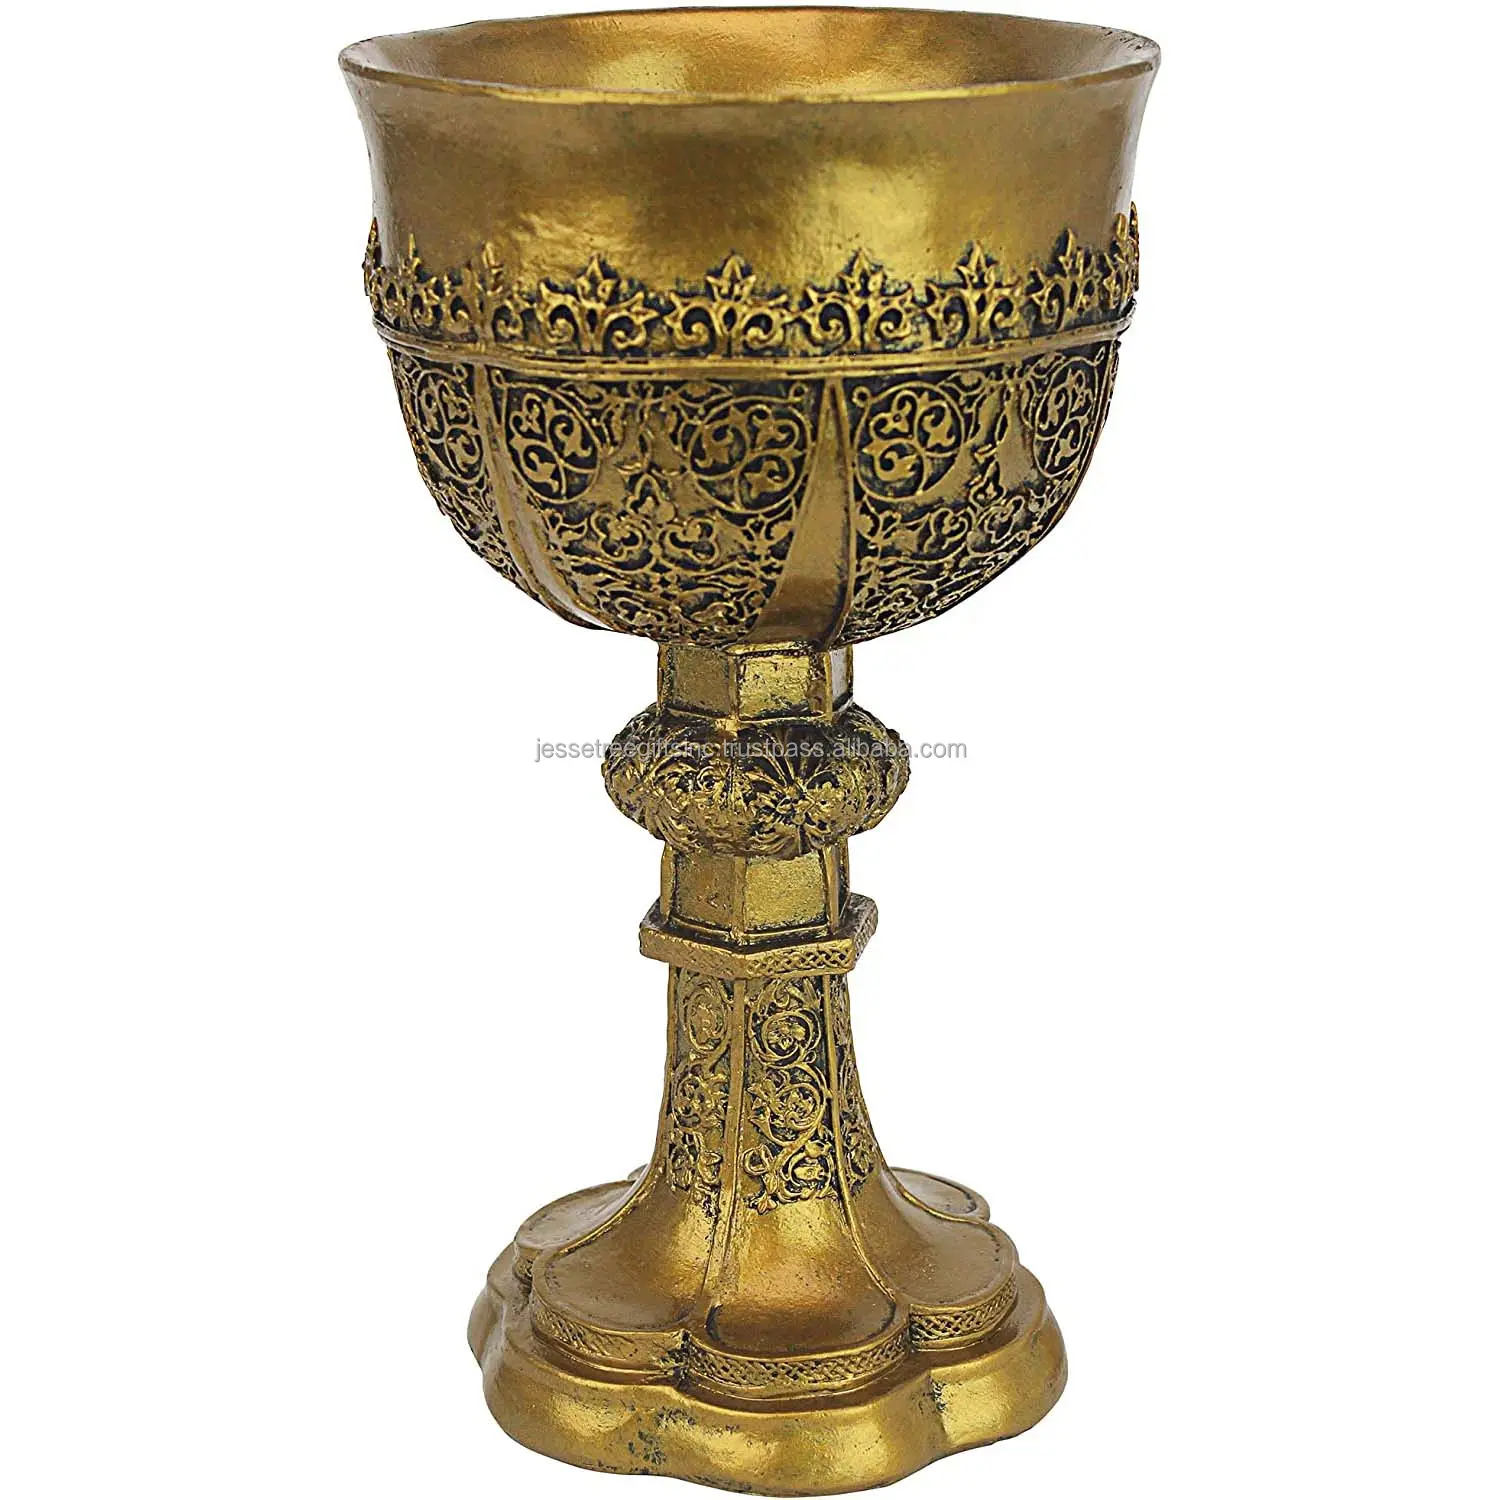 Handmade Brass Chalice With Antique Golden Powder Coating Finishing Round Shape Floral Embossed Design Good Quality For Drinking